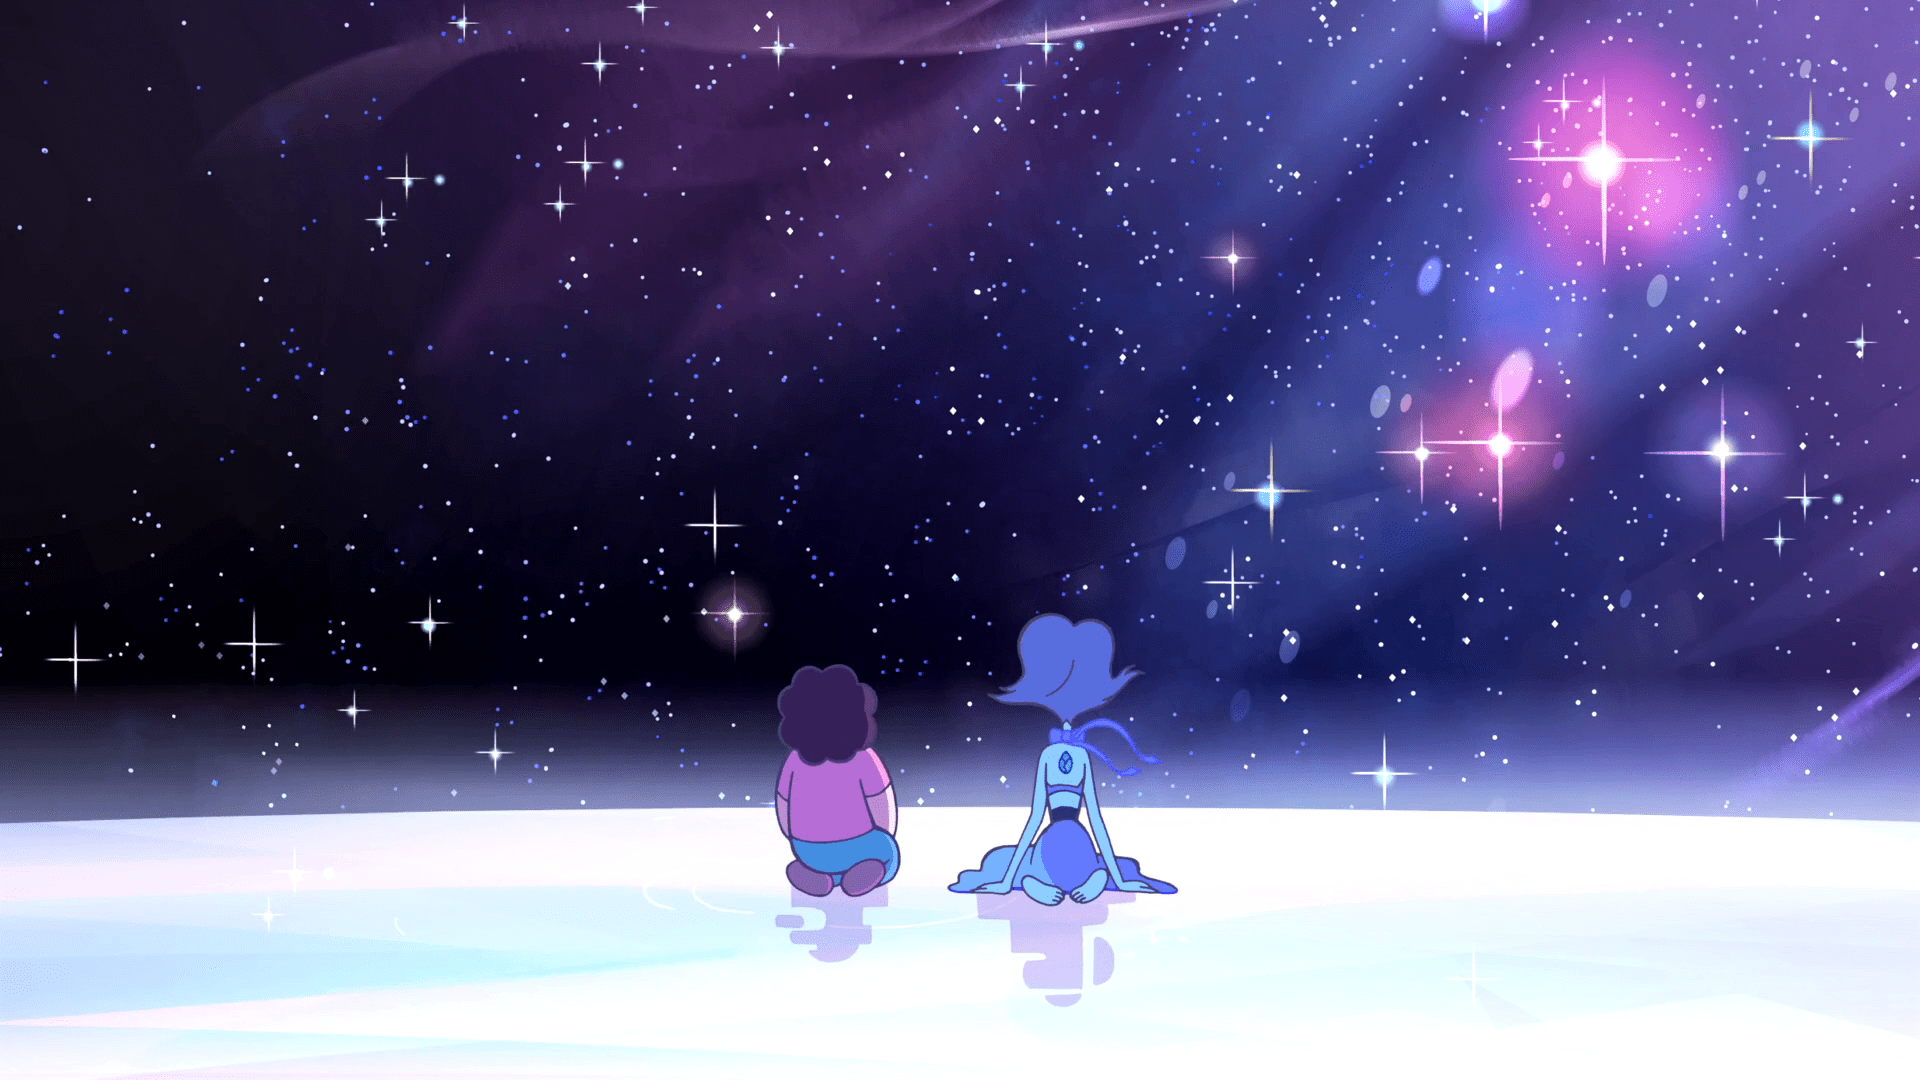 A young boy and a blue dog sit on a snowy hill looking at the stars. - Steven Universe